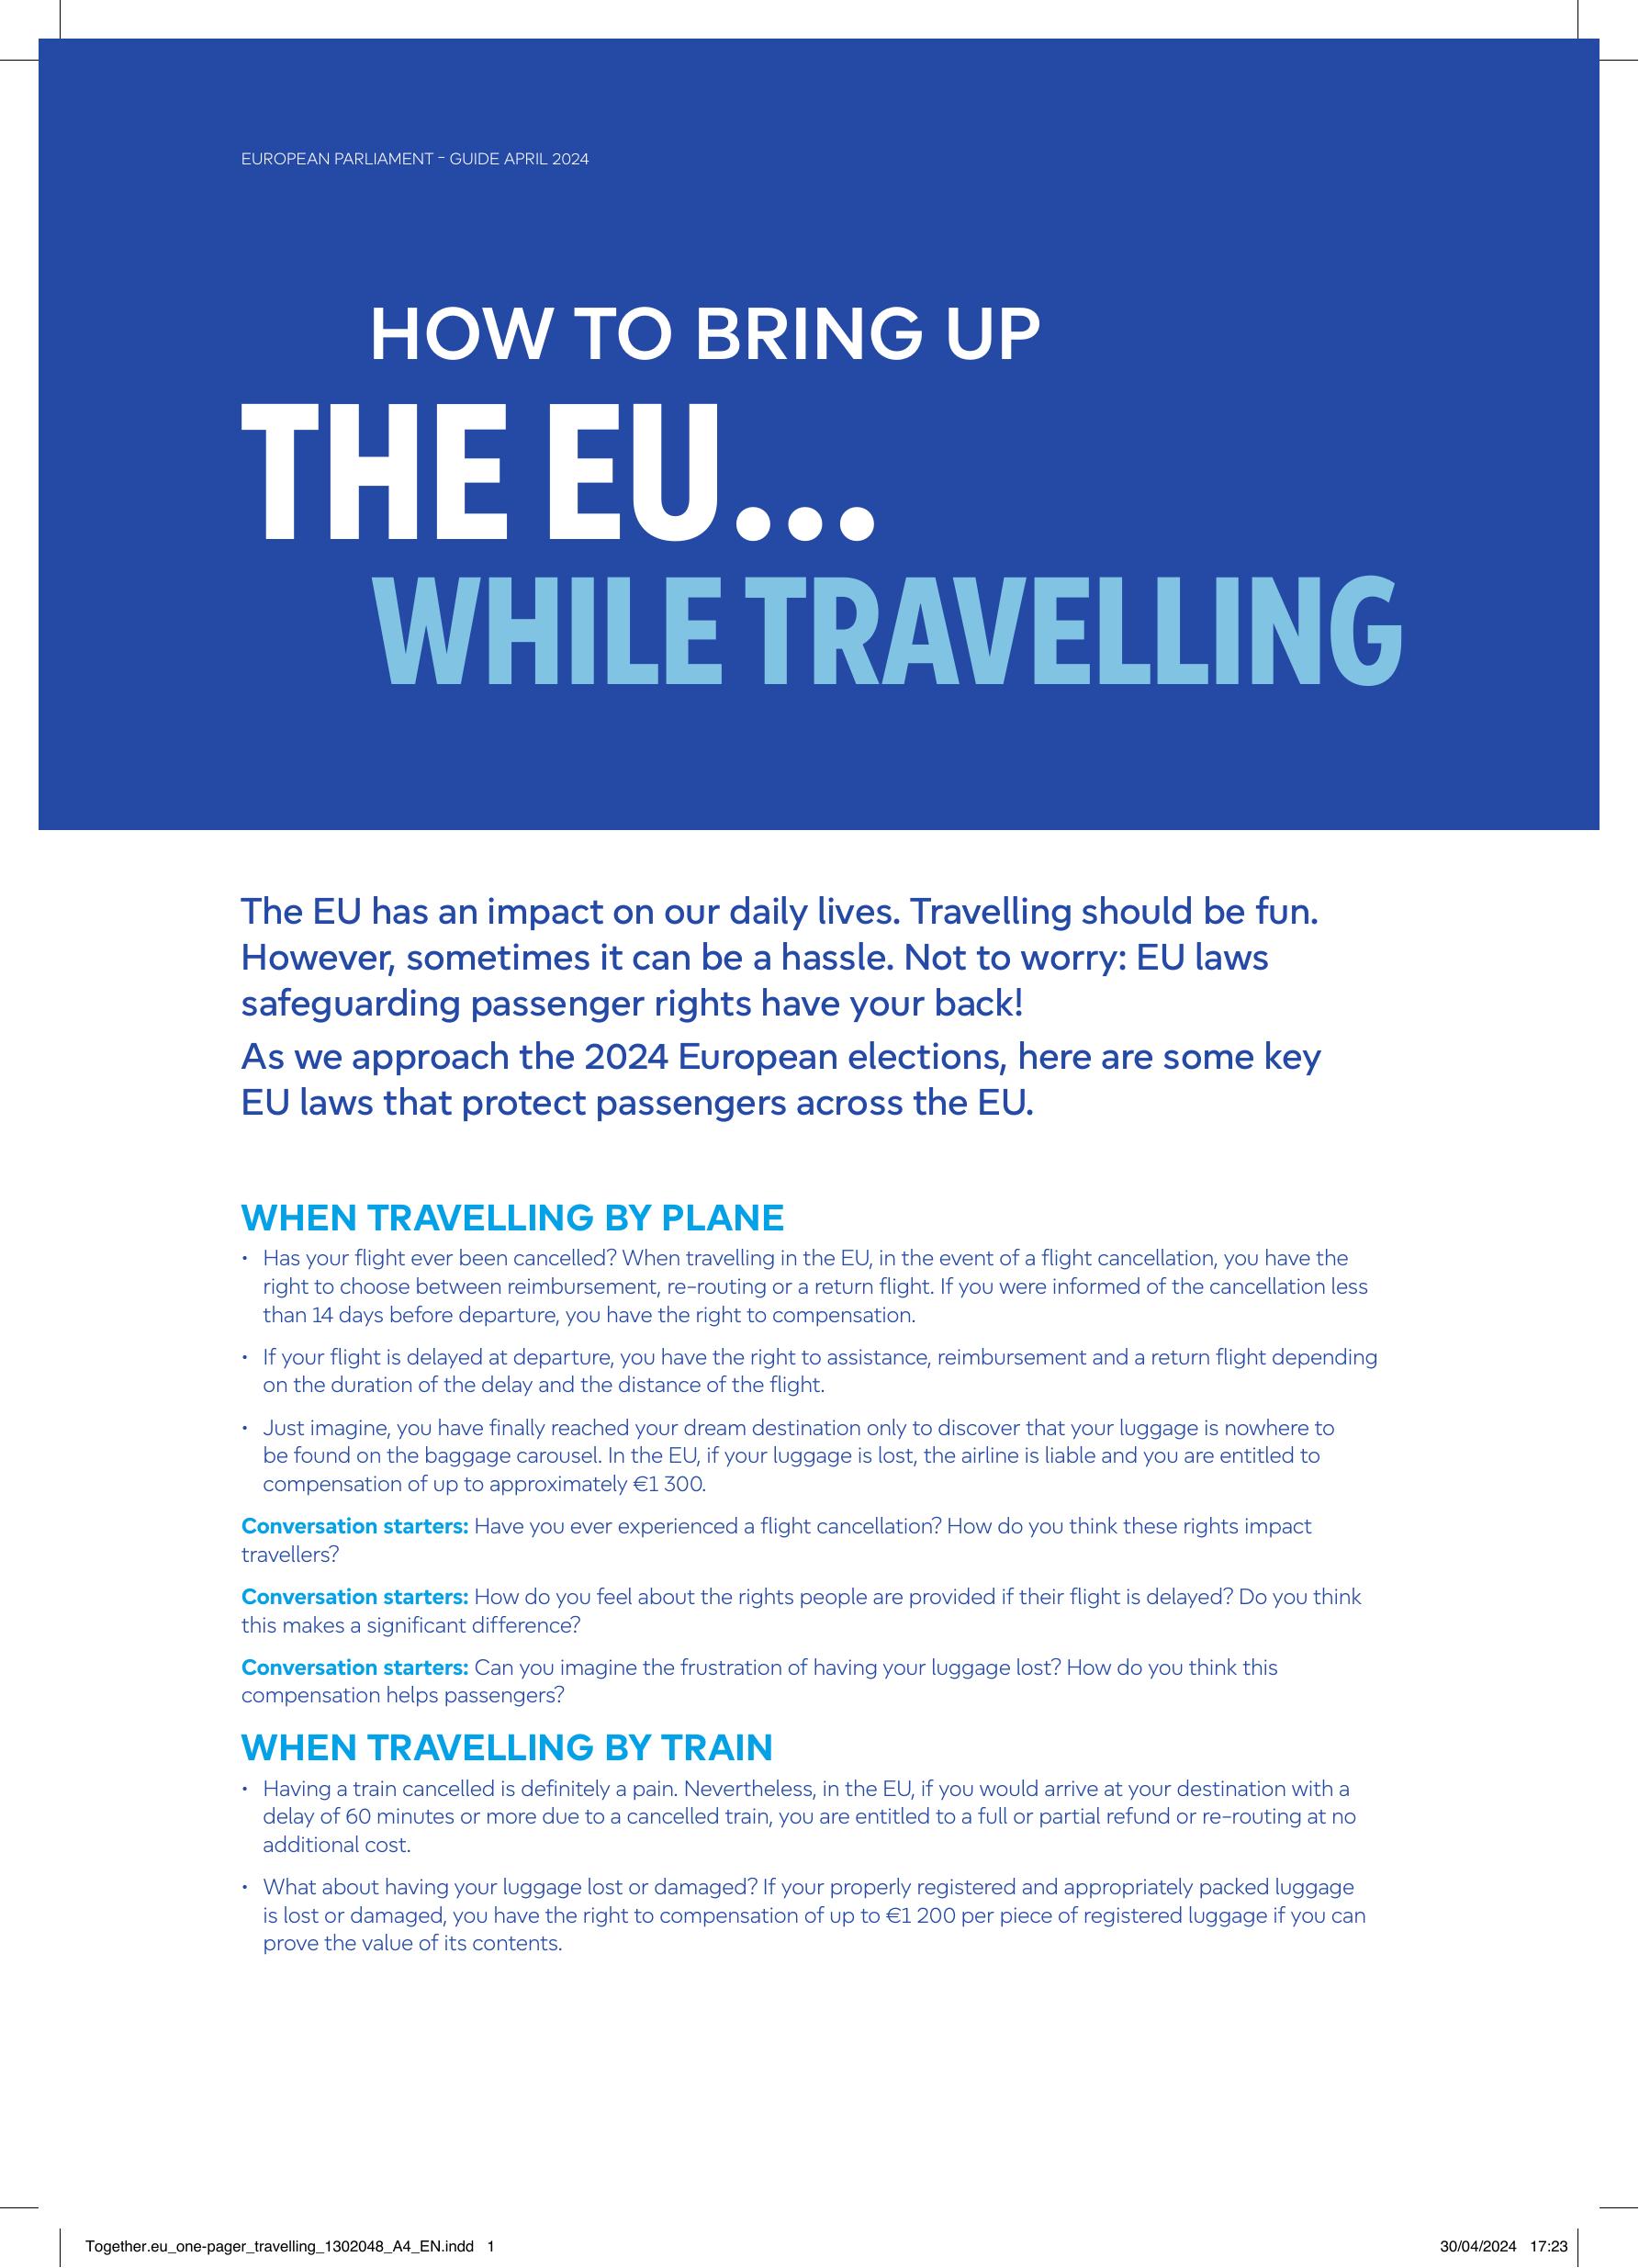 Together.eu_one-pager_travelling_A4_EN_print.pdf